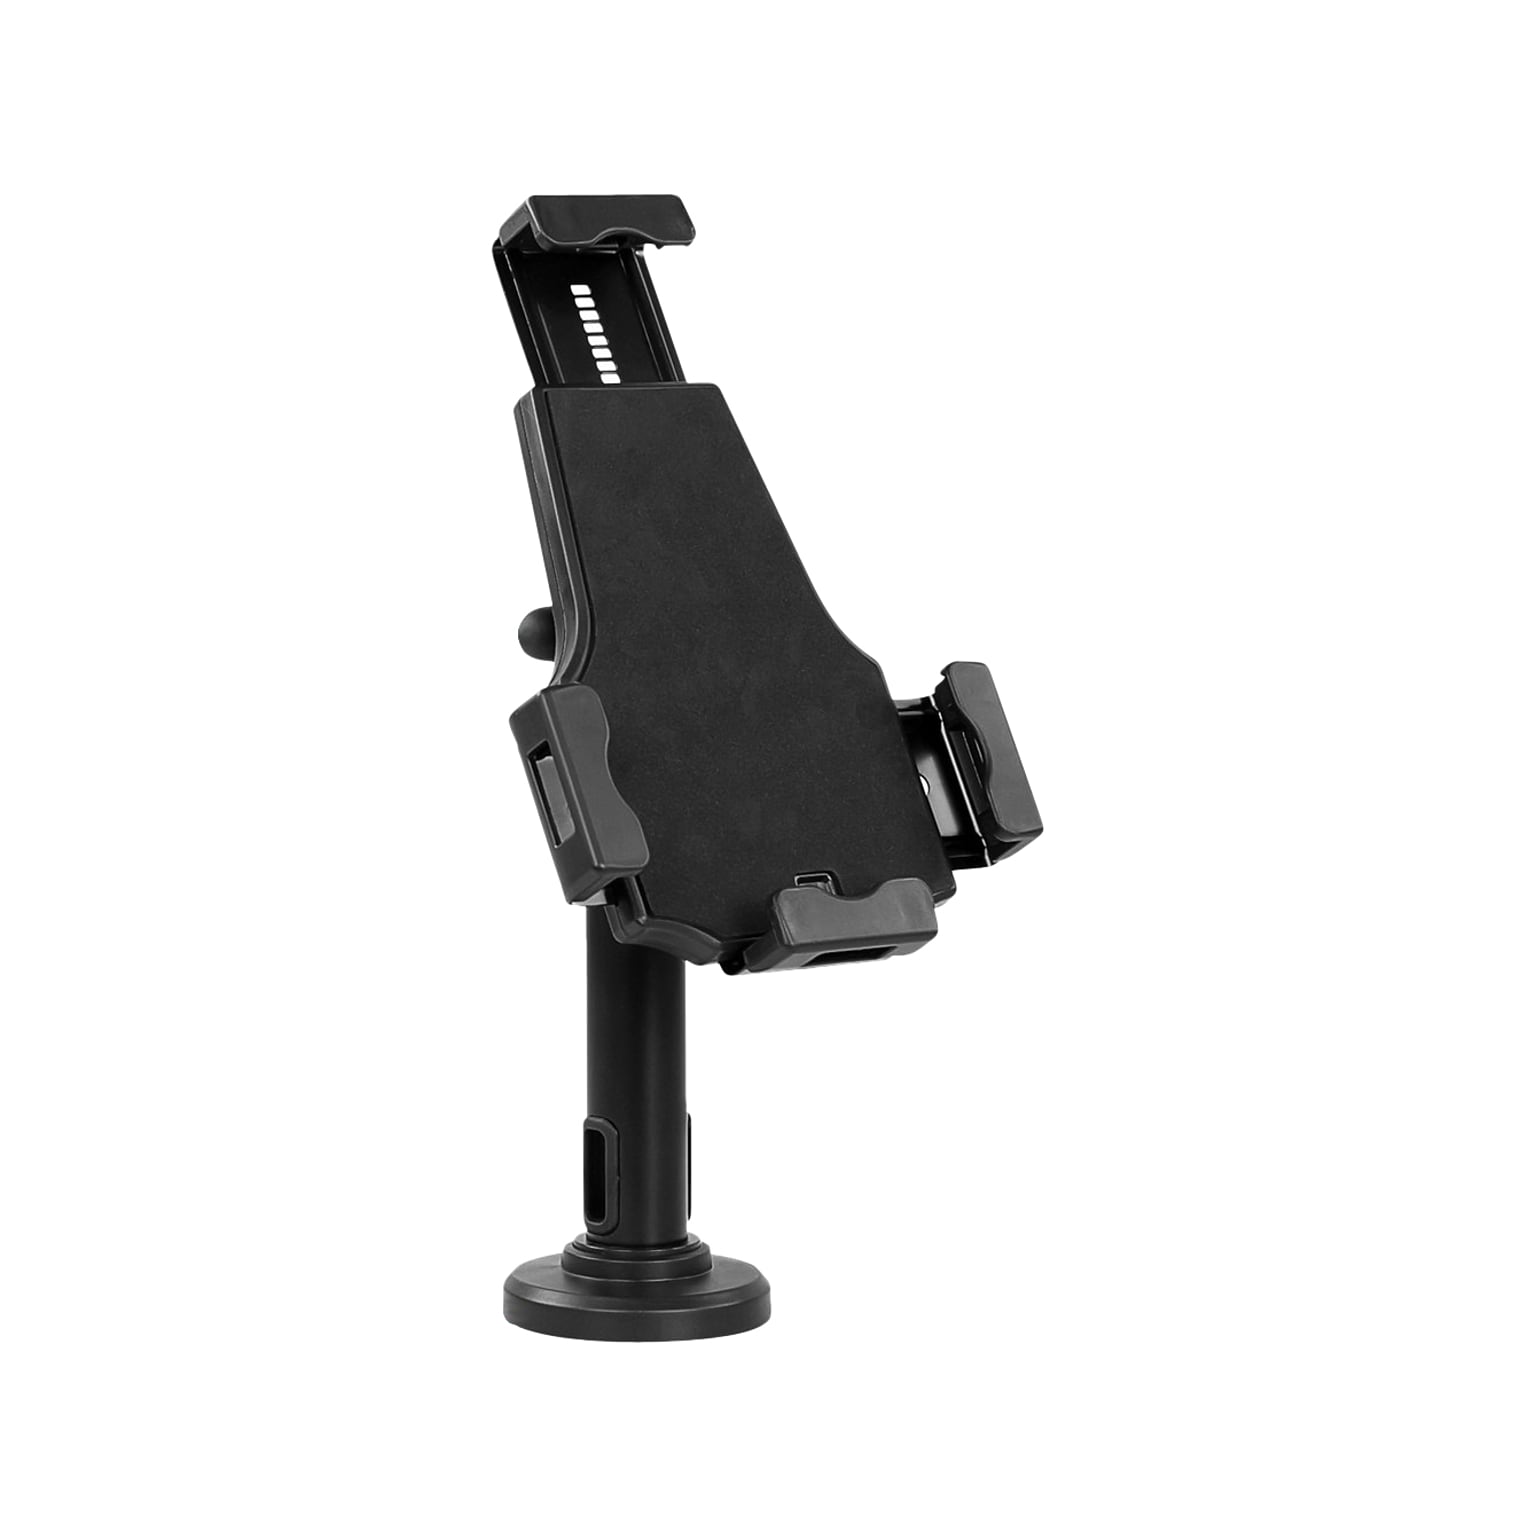 Mount-It! Tablet Stand MI-3784 with Cable Lock